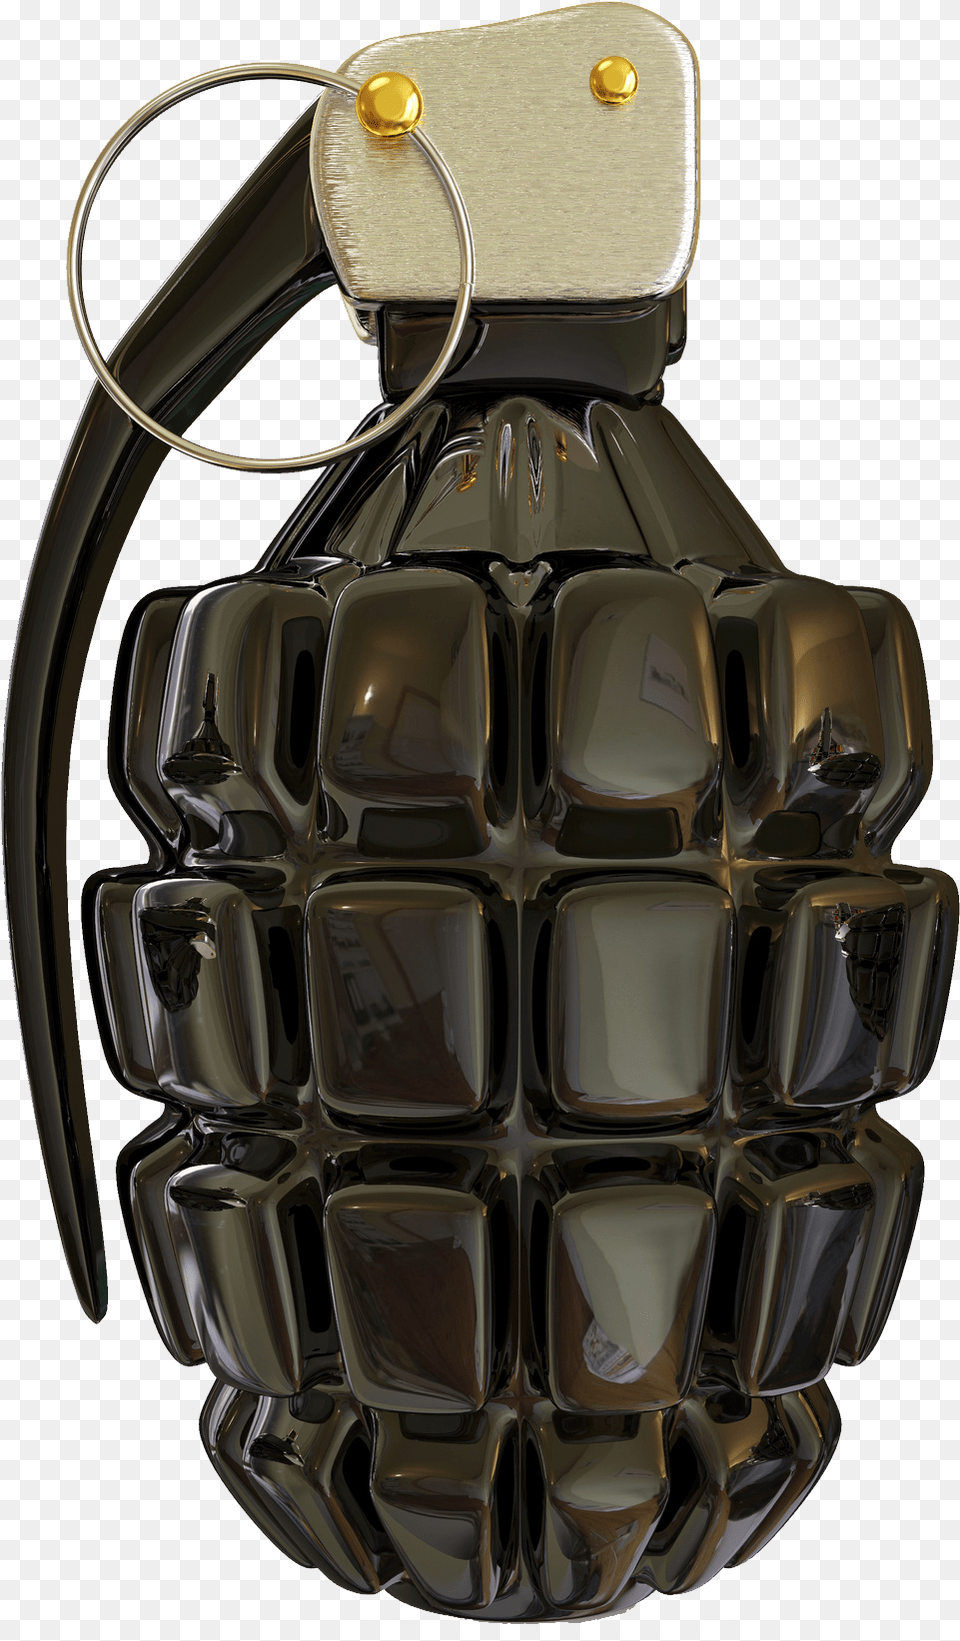 Grenade Hd Does A Hand Grenade Weigh, Ammunition, Weapon, Car, Transportation Png Image